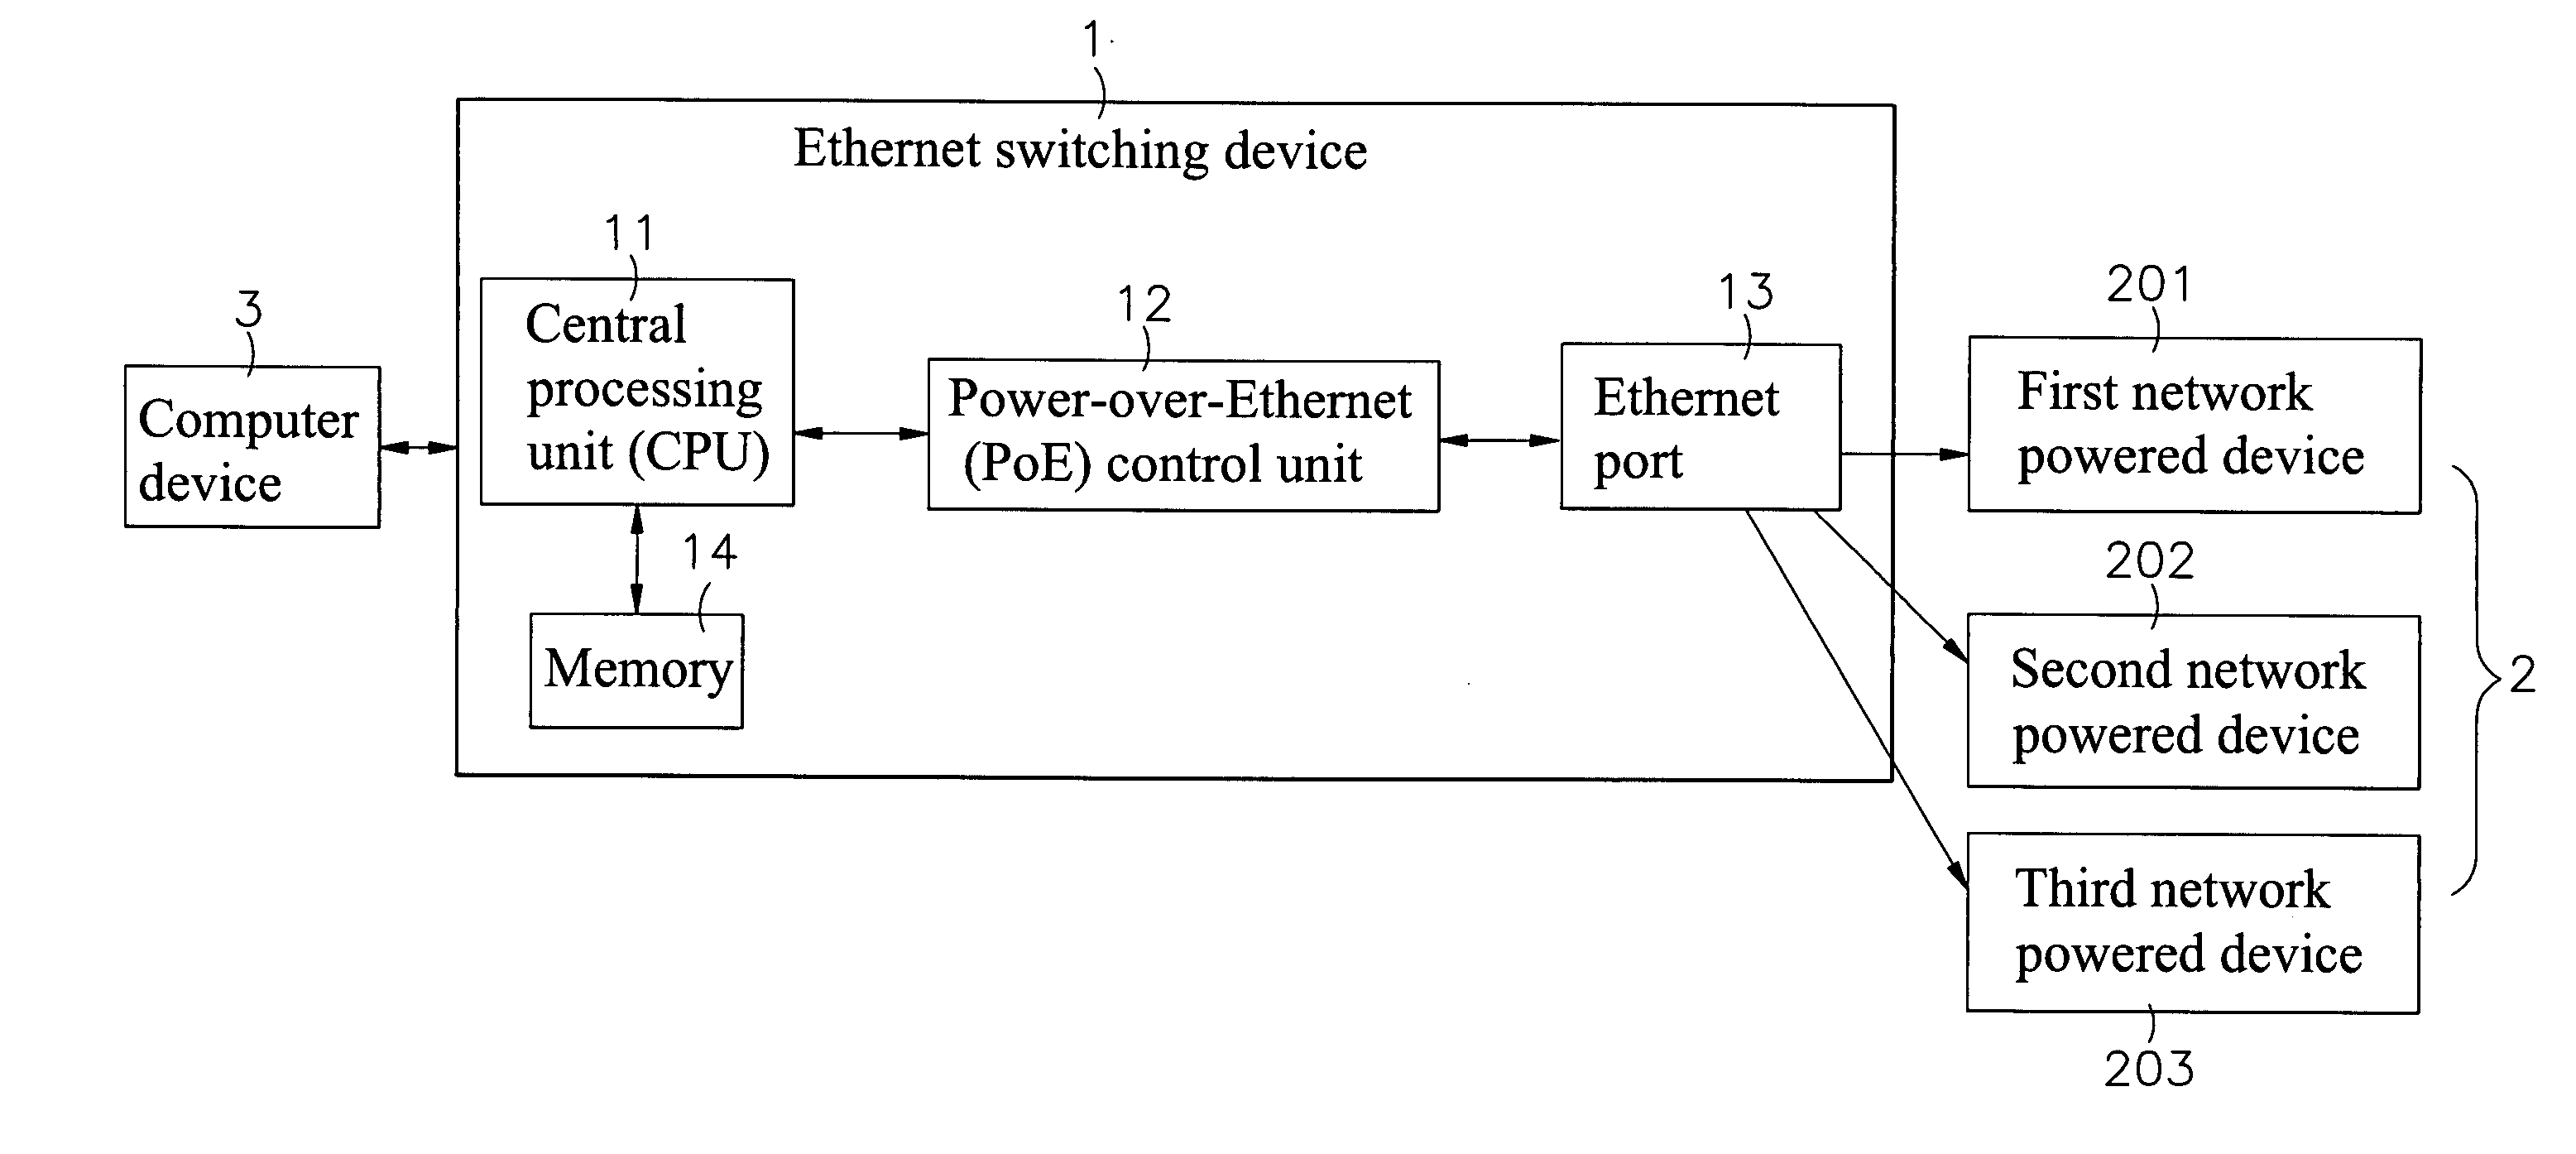 Method for power overload control in a network